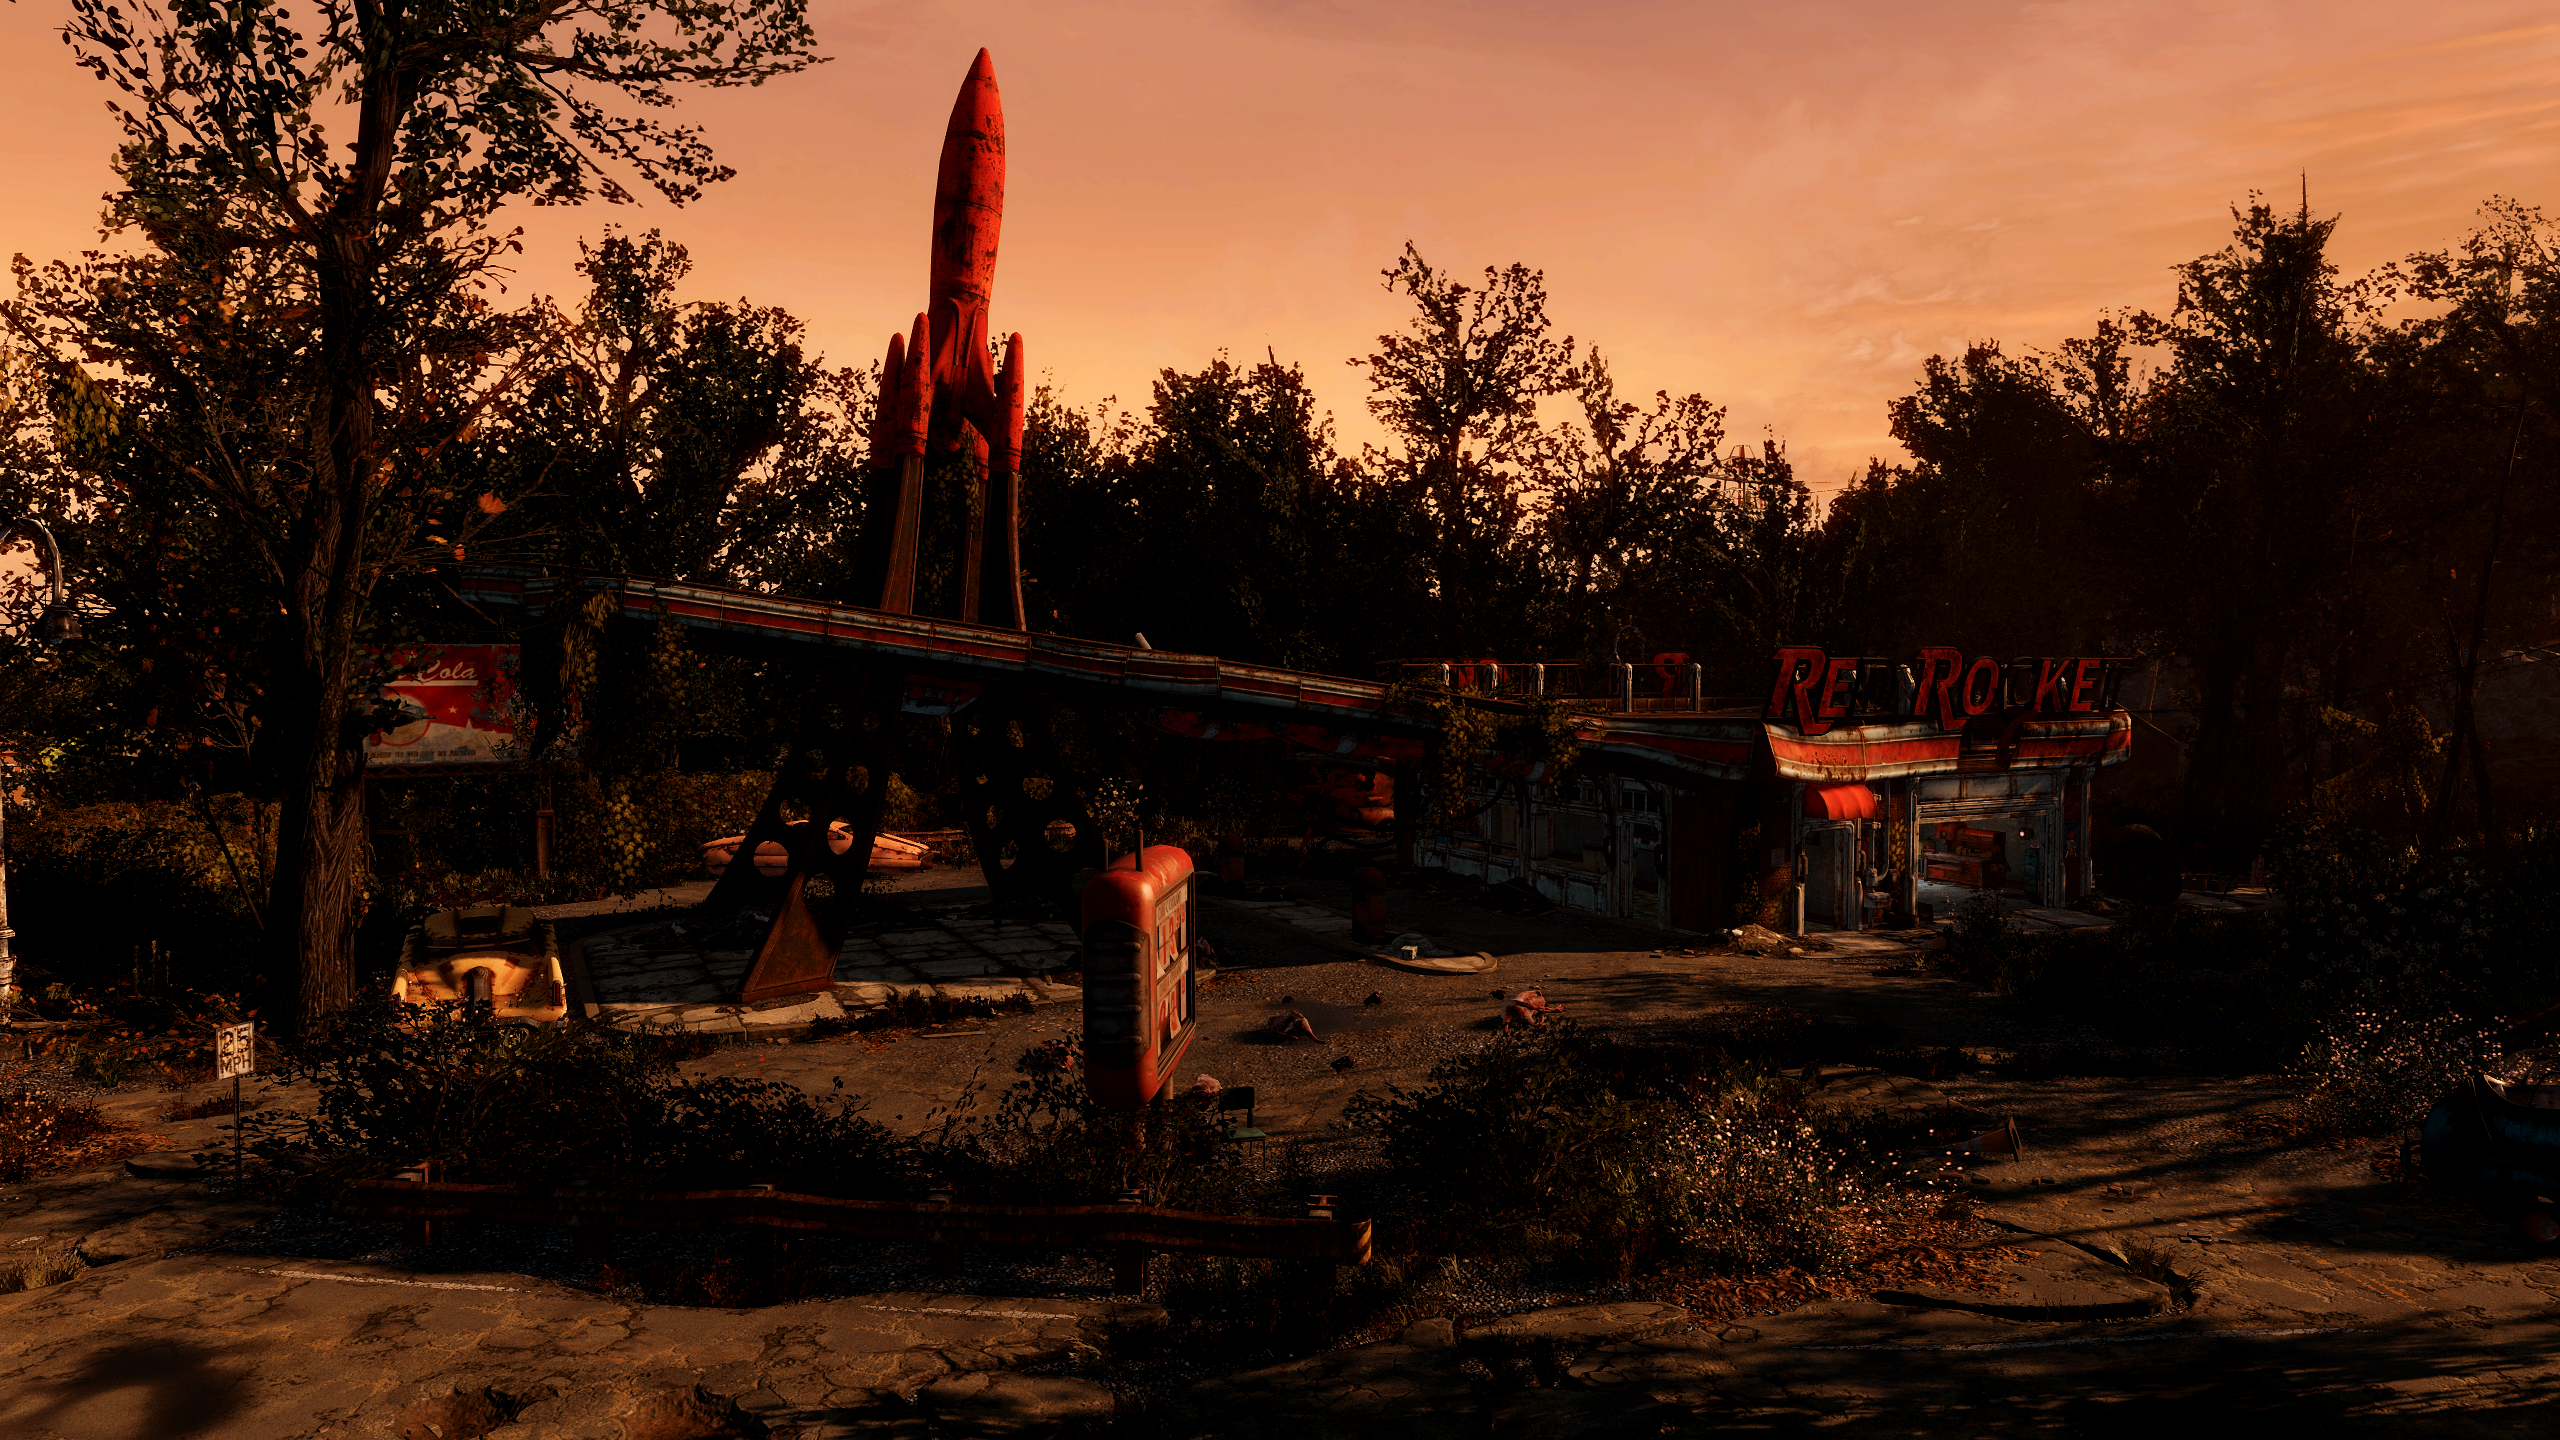 General 2560x1440 Fallout 4 video games Red Rocket Fallout video game art trees sunset glow CGI Bethesda Softworks